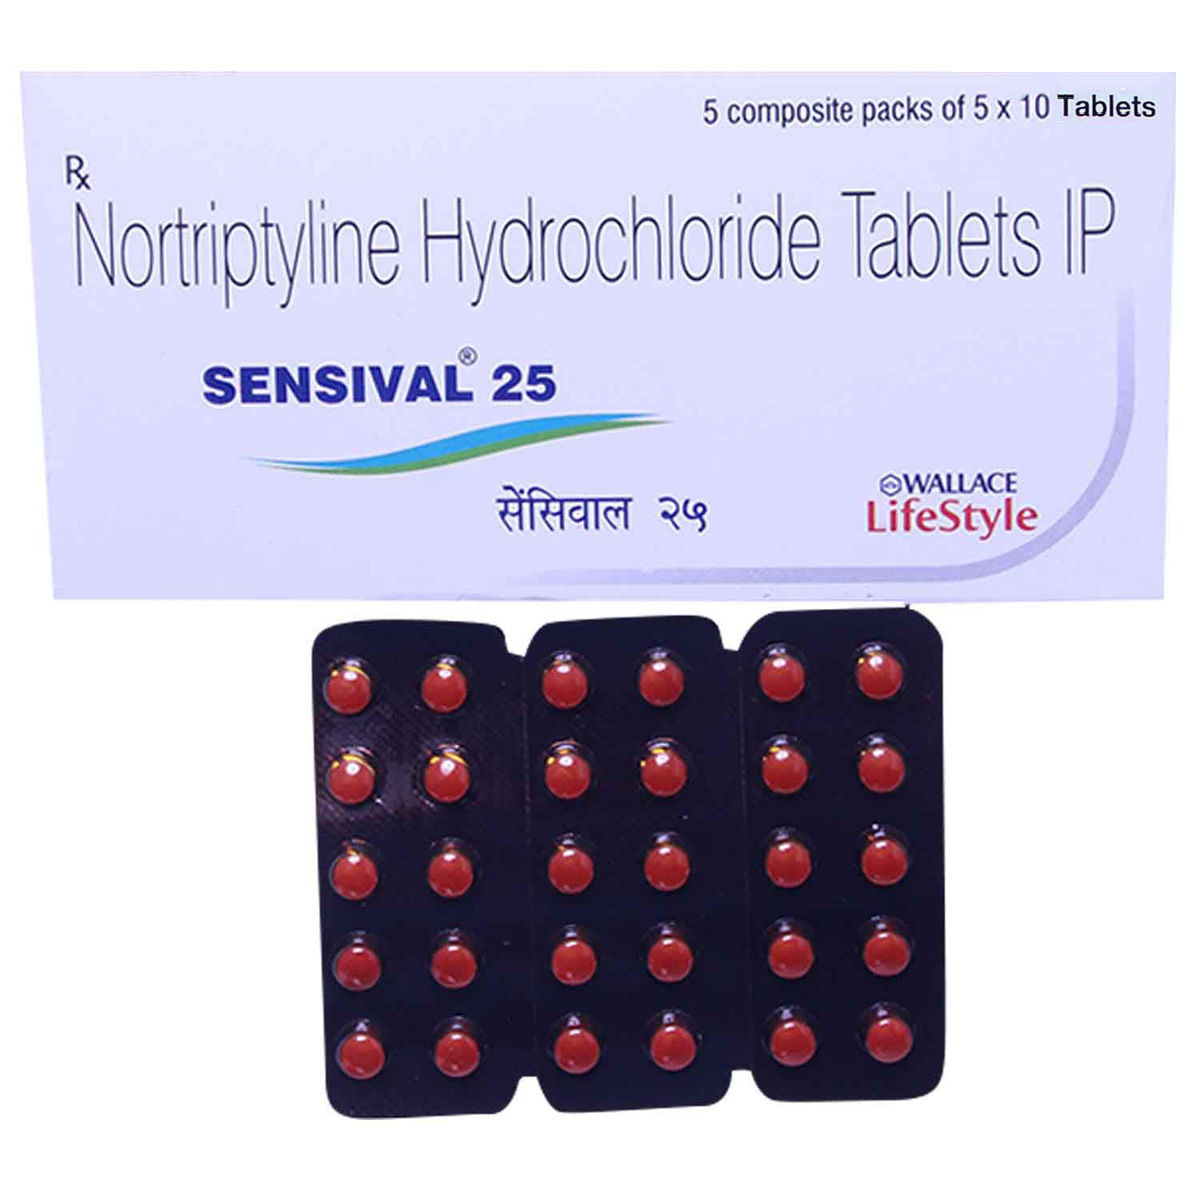 Sensival 25 Tablet 10's Price, Uses, Side Effects, Composition - Apollo  Pharmacy